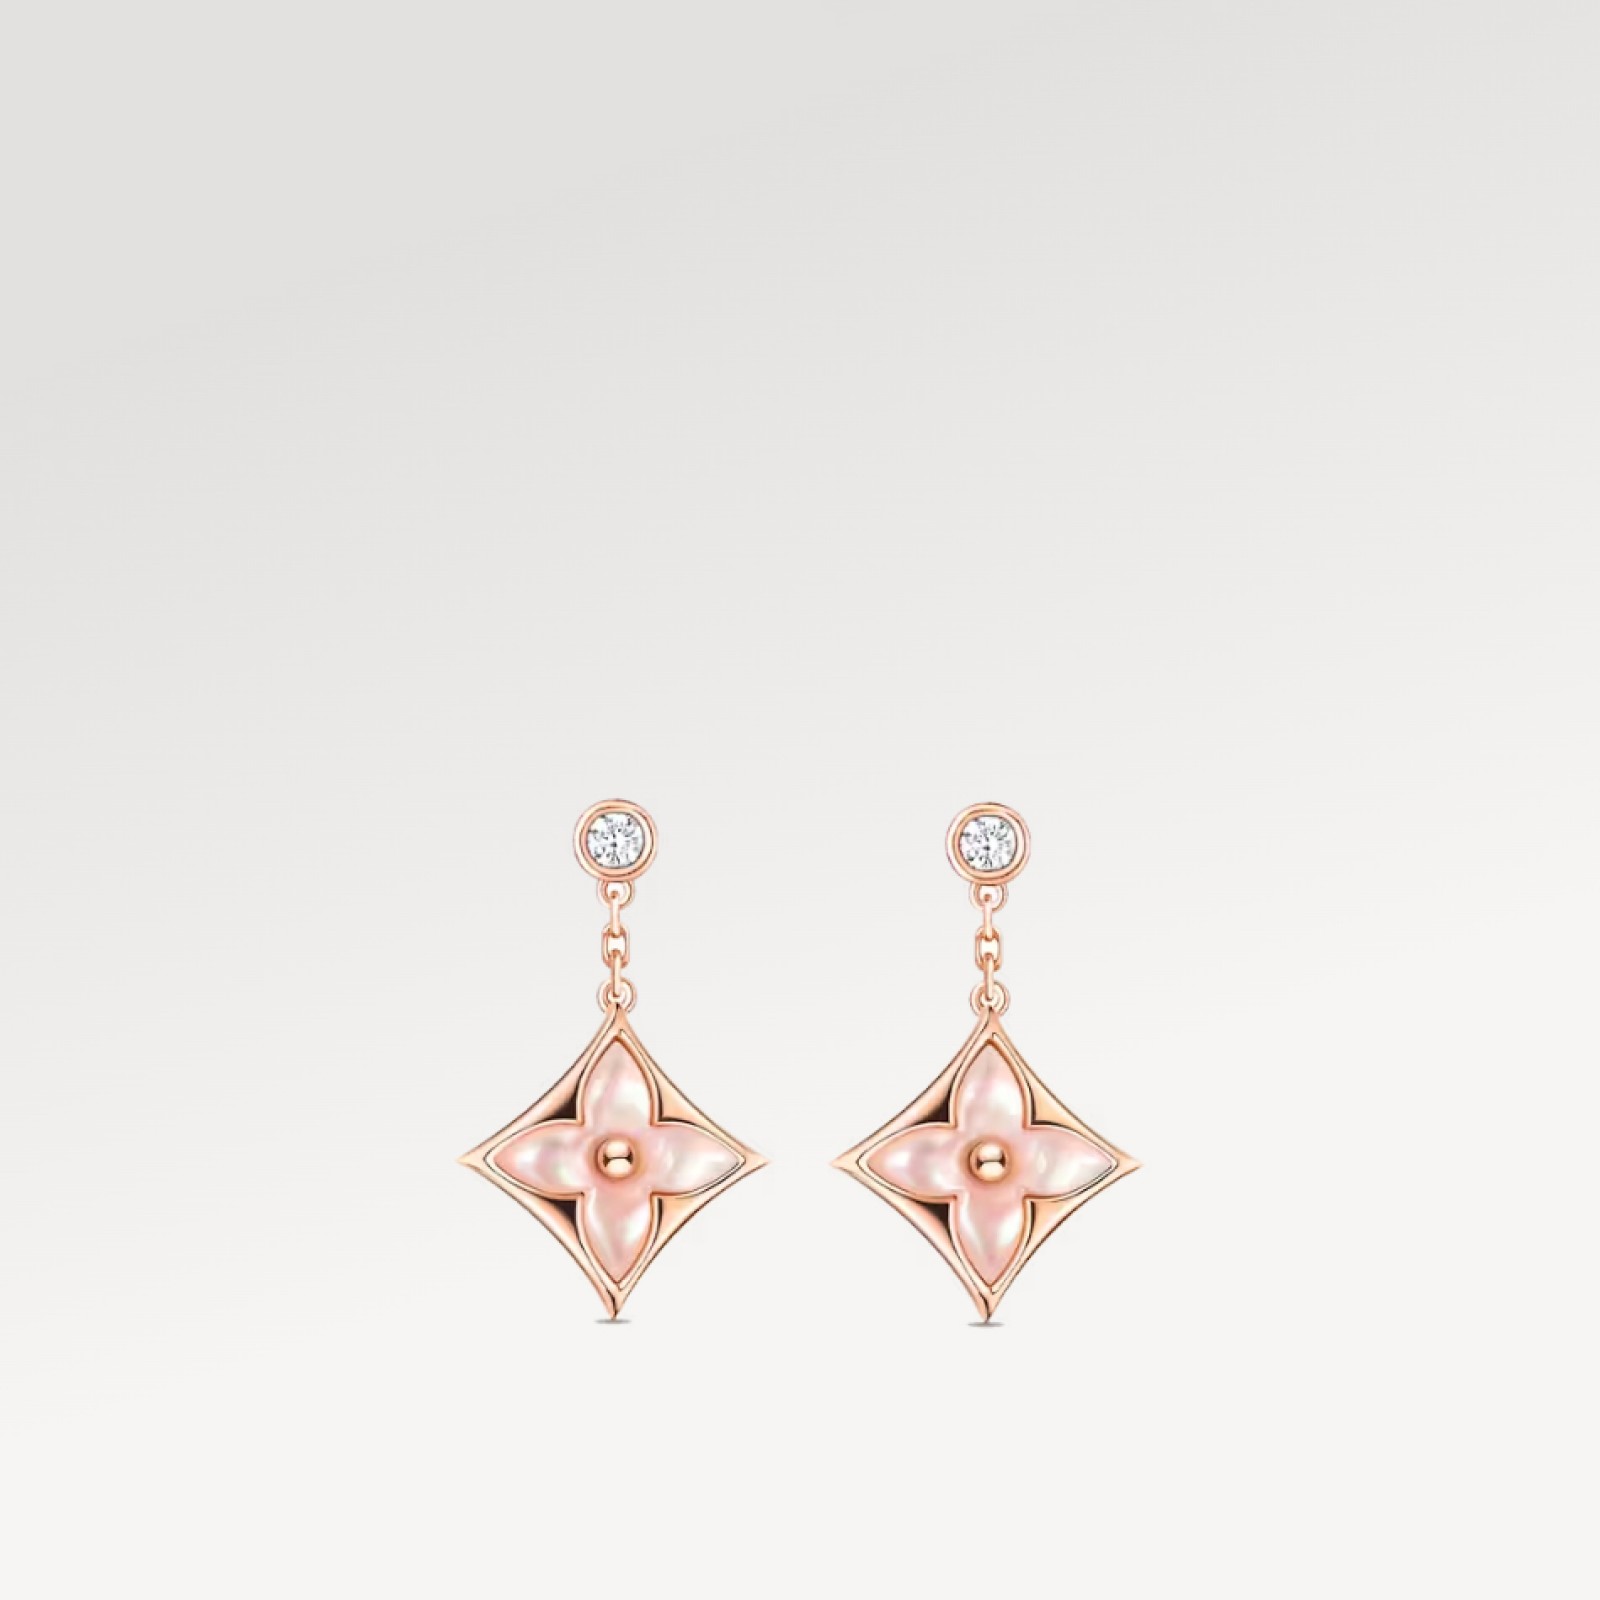 Color Blossom BB Star Ear Studs, Pink gold, pink Mother of pearl and diamonds